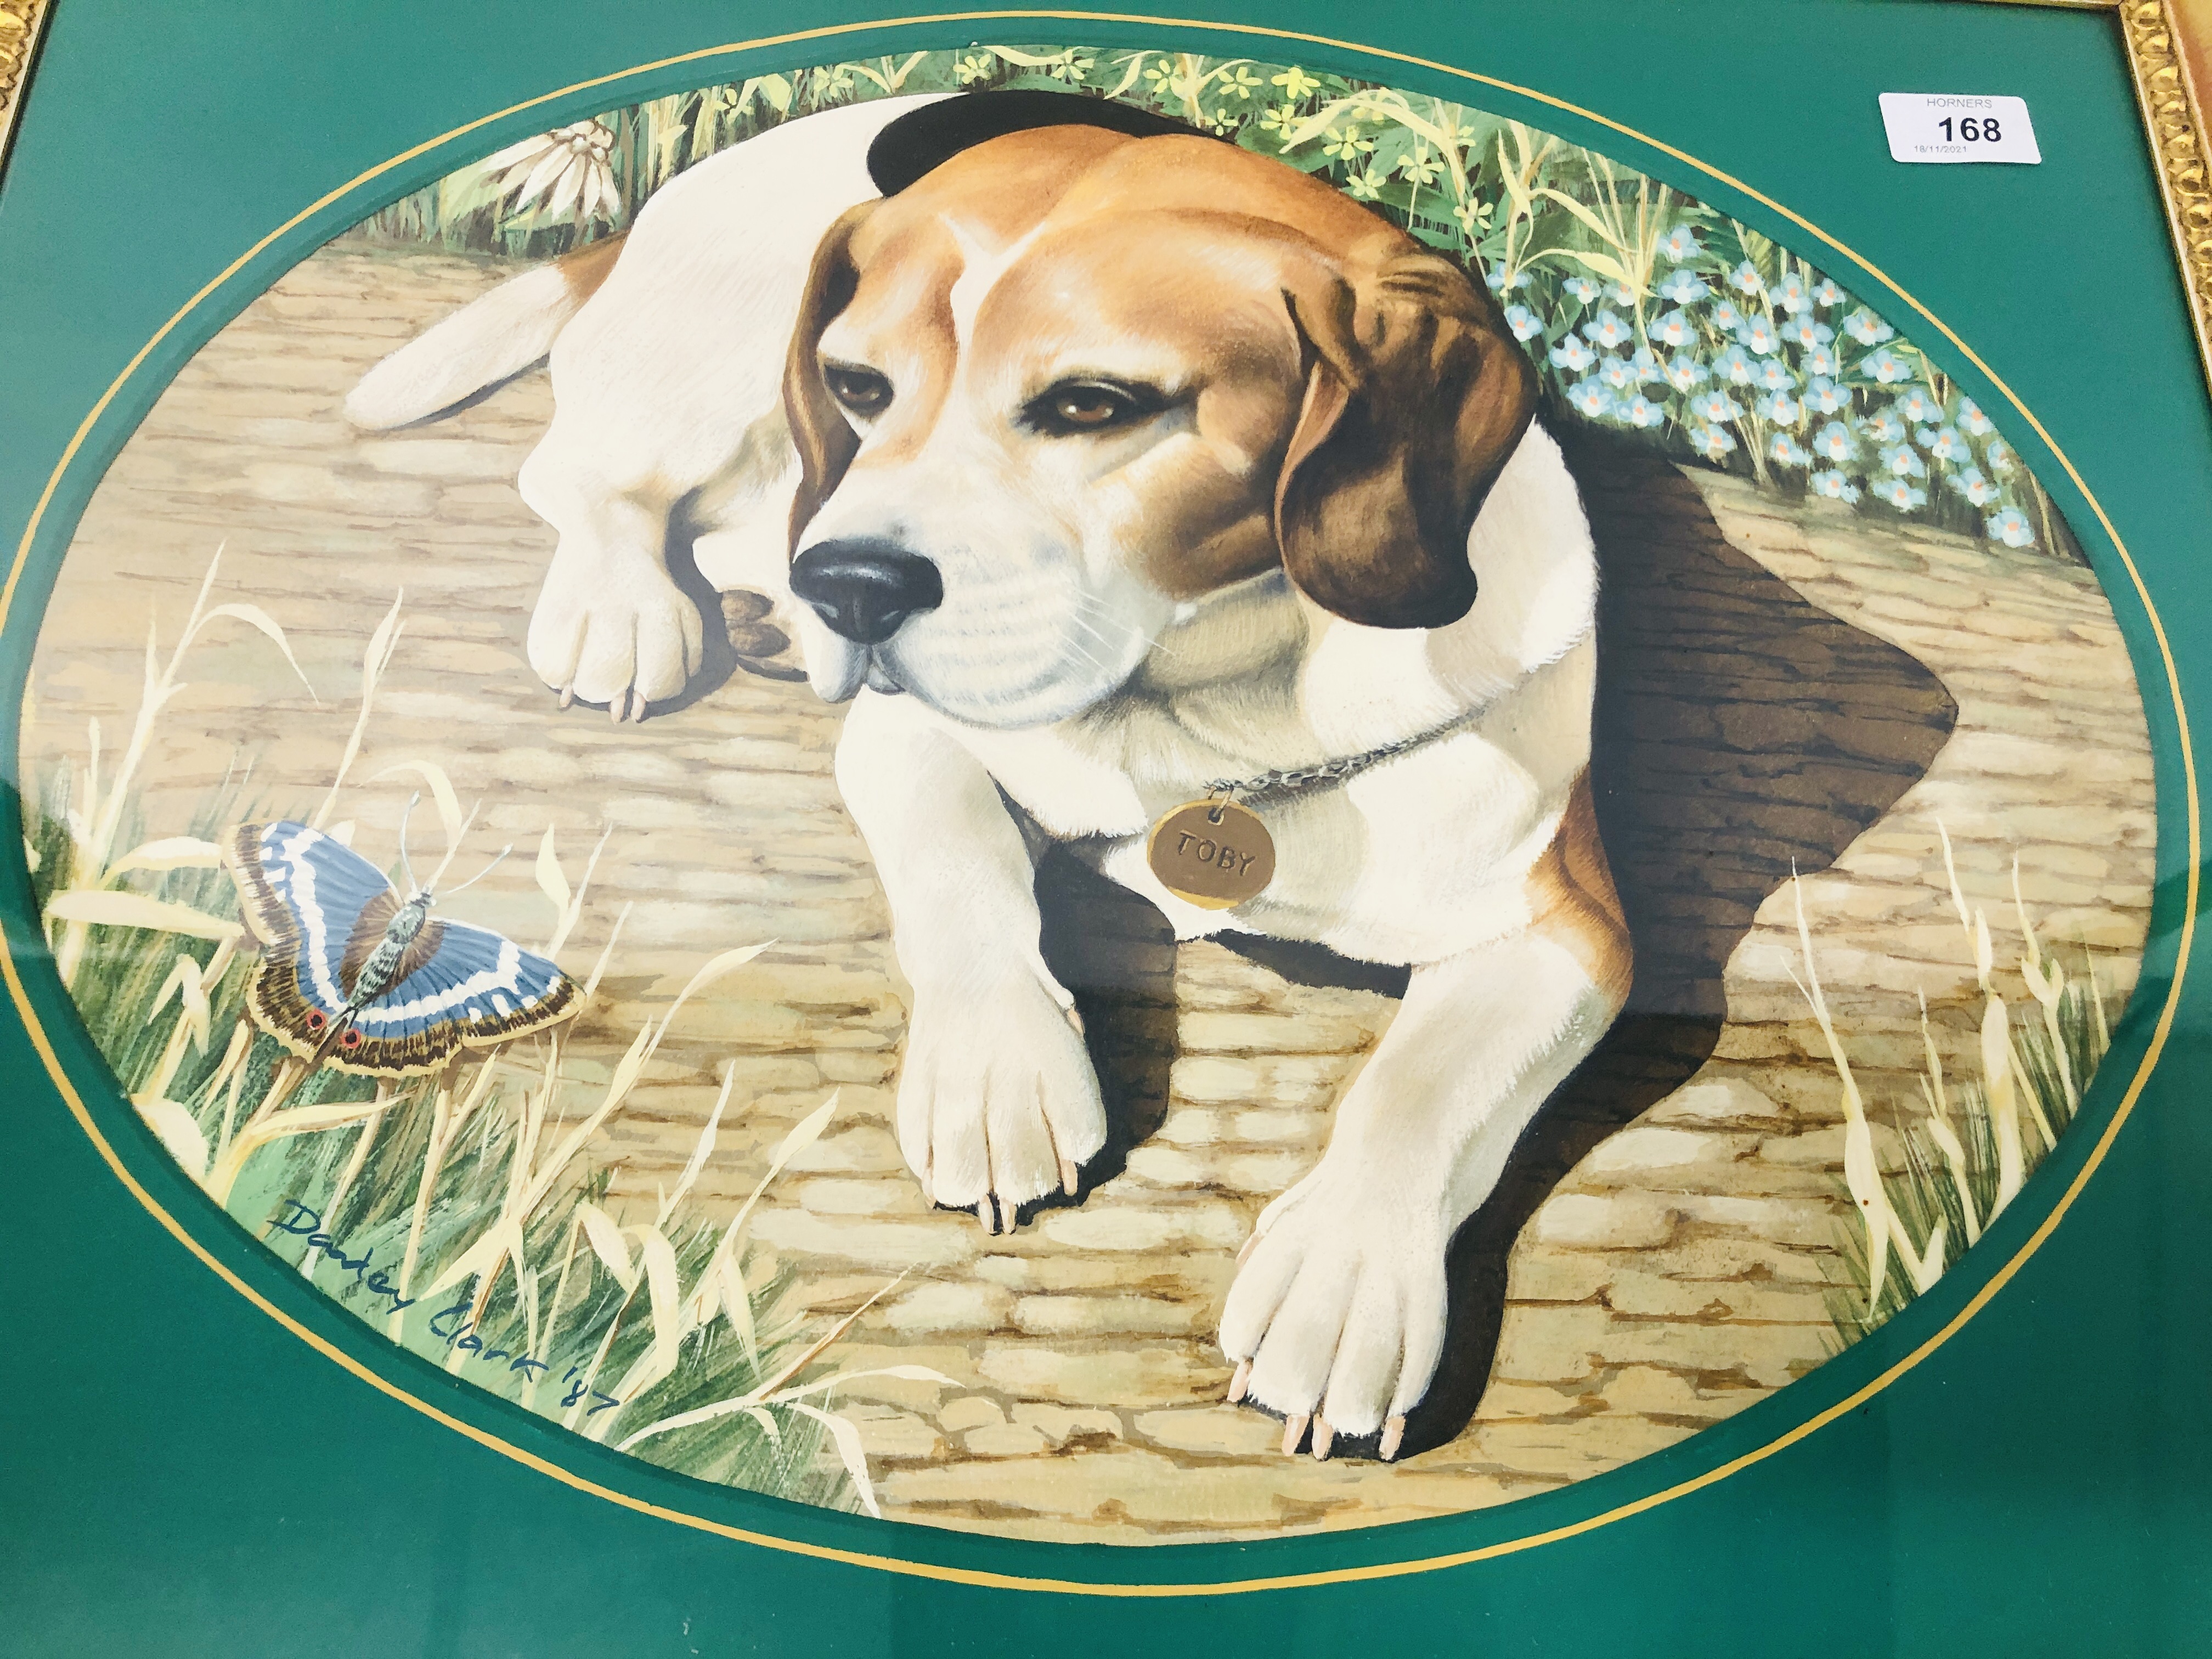 FRAMED OIL OF A BEAGLE "TOBY" IN OVAL MOUNT BEARING SIGNATURE D. CLARK - W 44CM. H 34CM. - Image 4 of 5